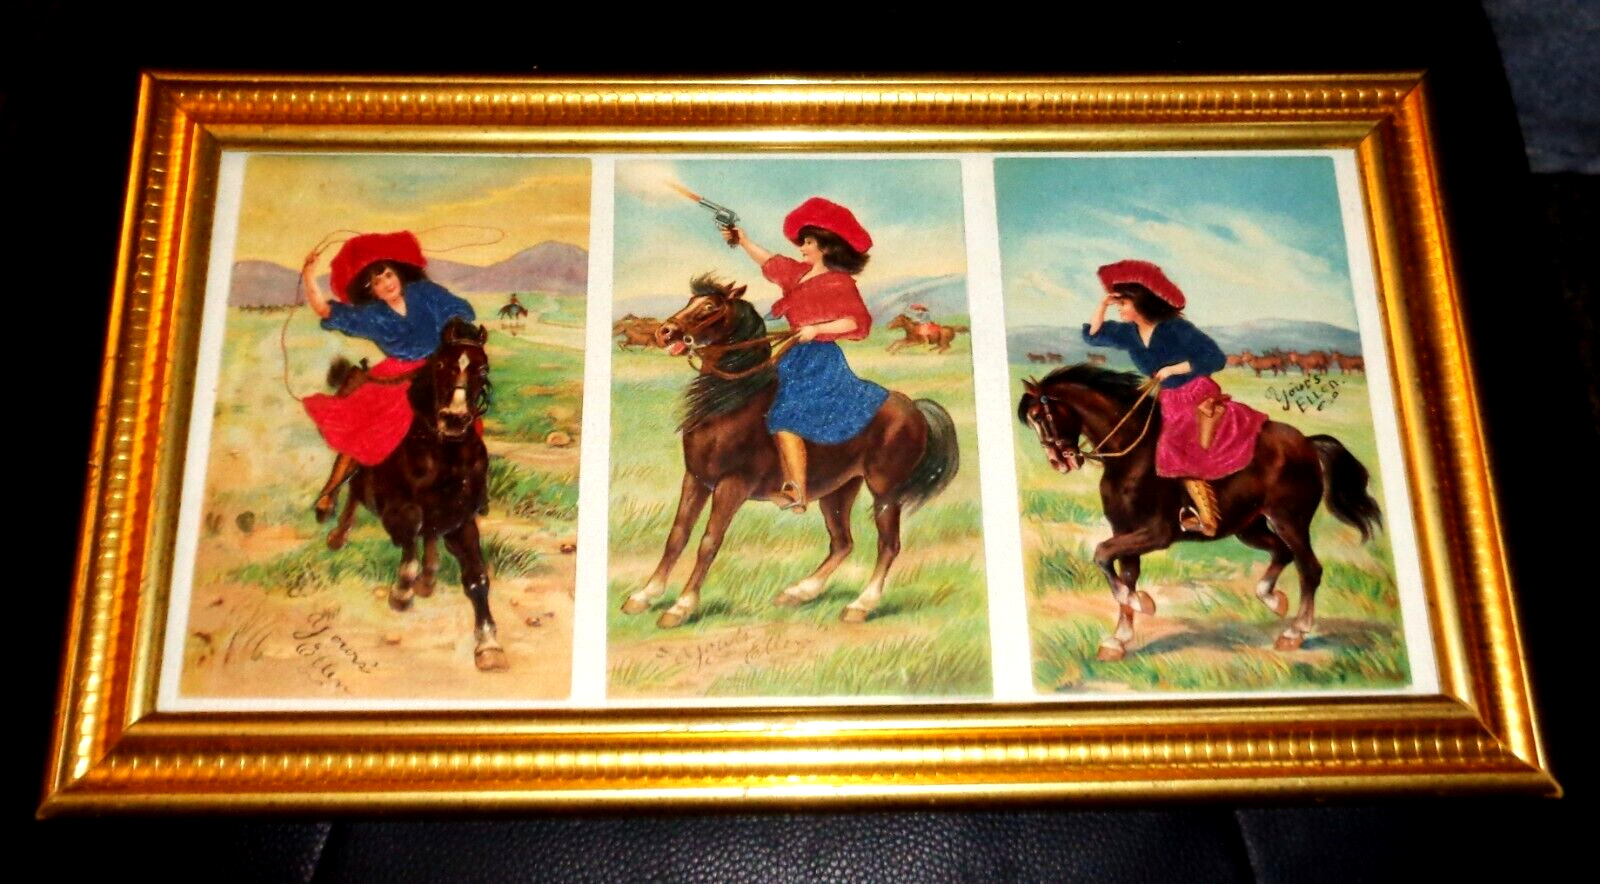 XRARE VINTAGE COWGIRLS 1908 SET POSTCARDS IN FRAME-ONE CENT STAMPS-HANDPAINTED